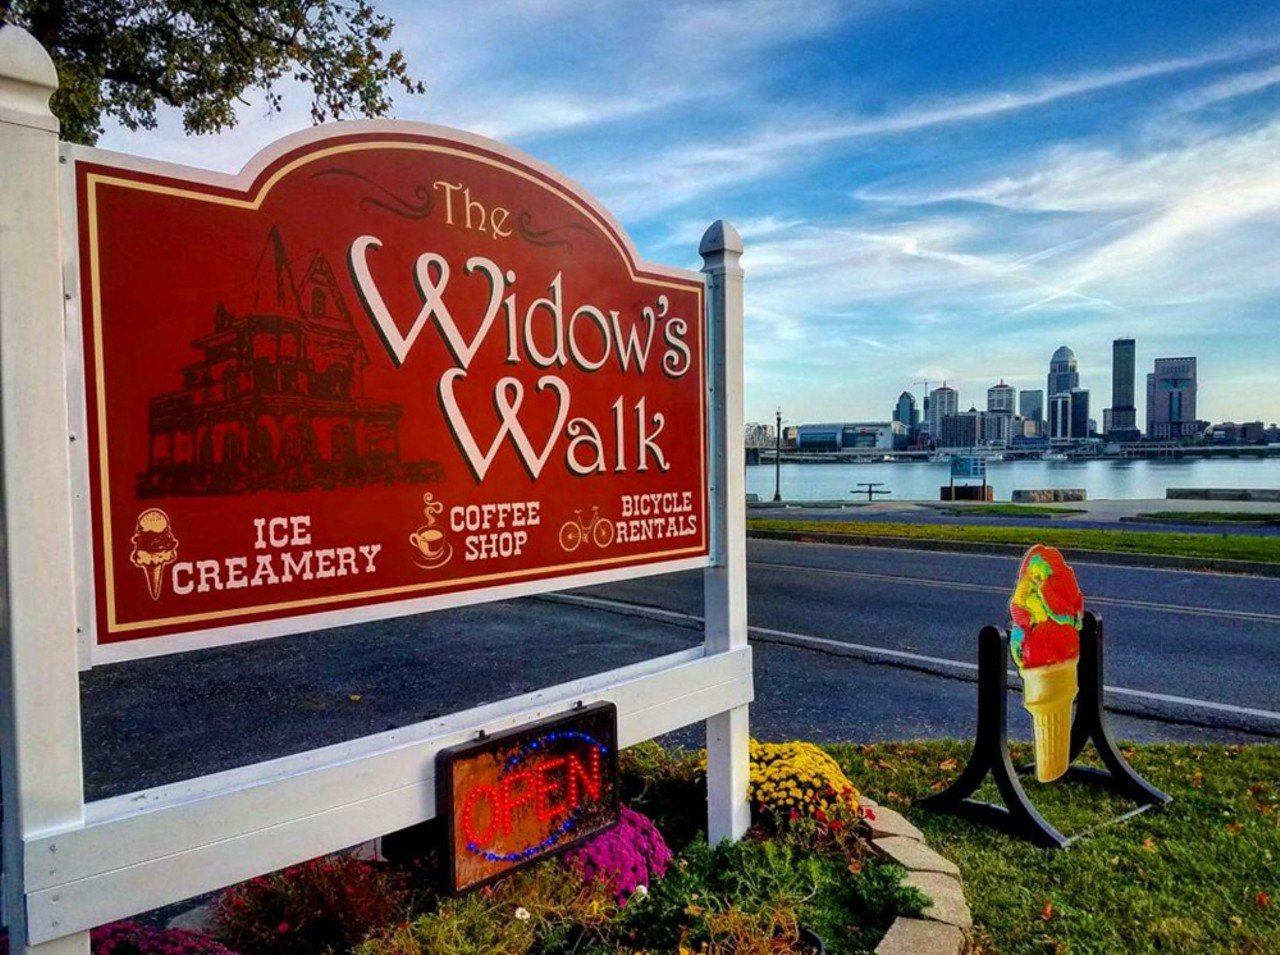 The Widow's Walk Ice Creamery
415 E. Riverside Drive, Clarksville
Though an old Victorian house by the river seems like an odd place to get a scoop of ice cream, the Widow&#146;s Walk is quite popular and definitely worth a visit. Stop for the ice cream, stay for the gorgeous view of the Ohio River at sunset.
Photo via facebook.com/thewidowswalkicecreamery